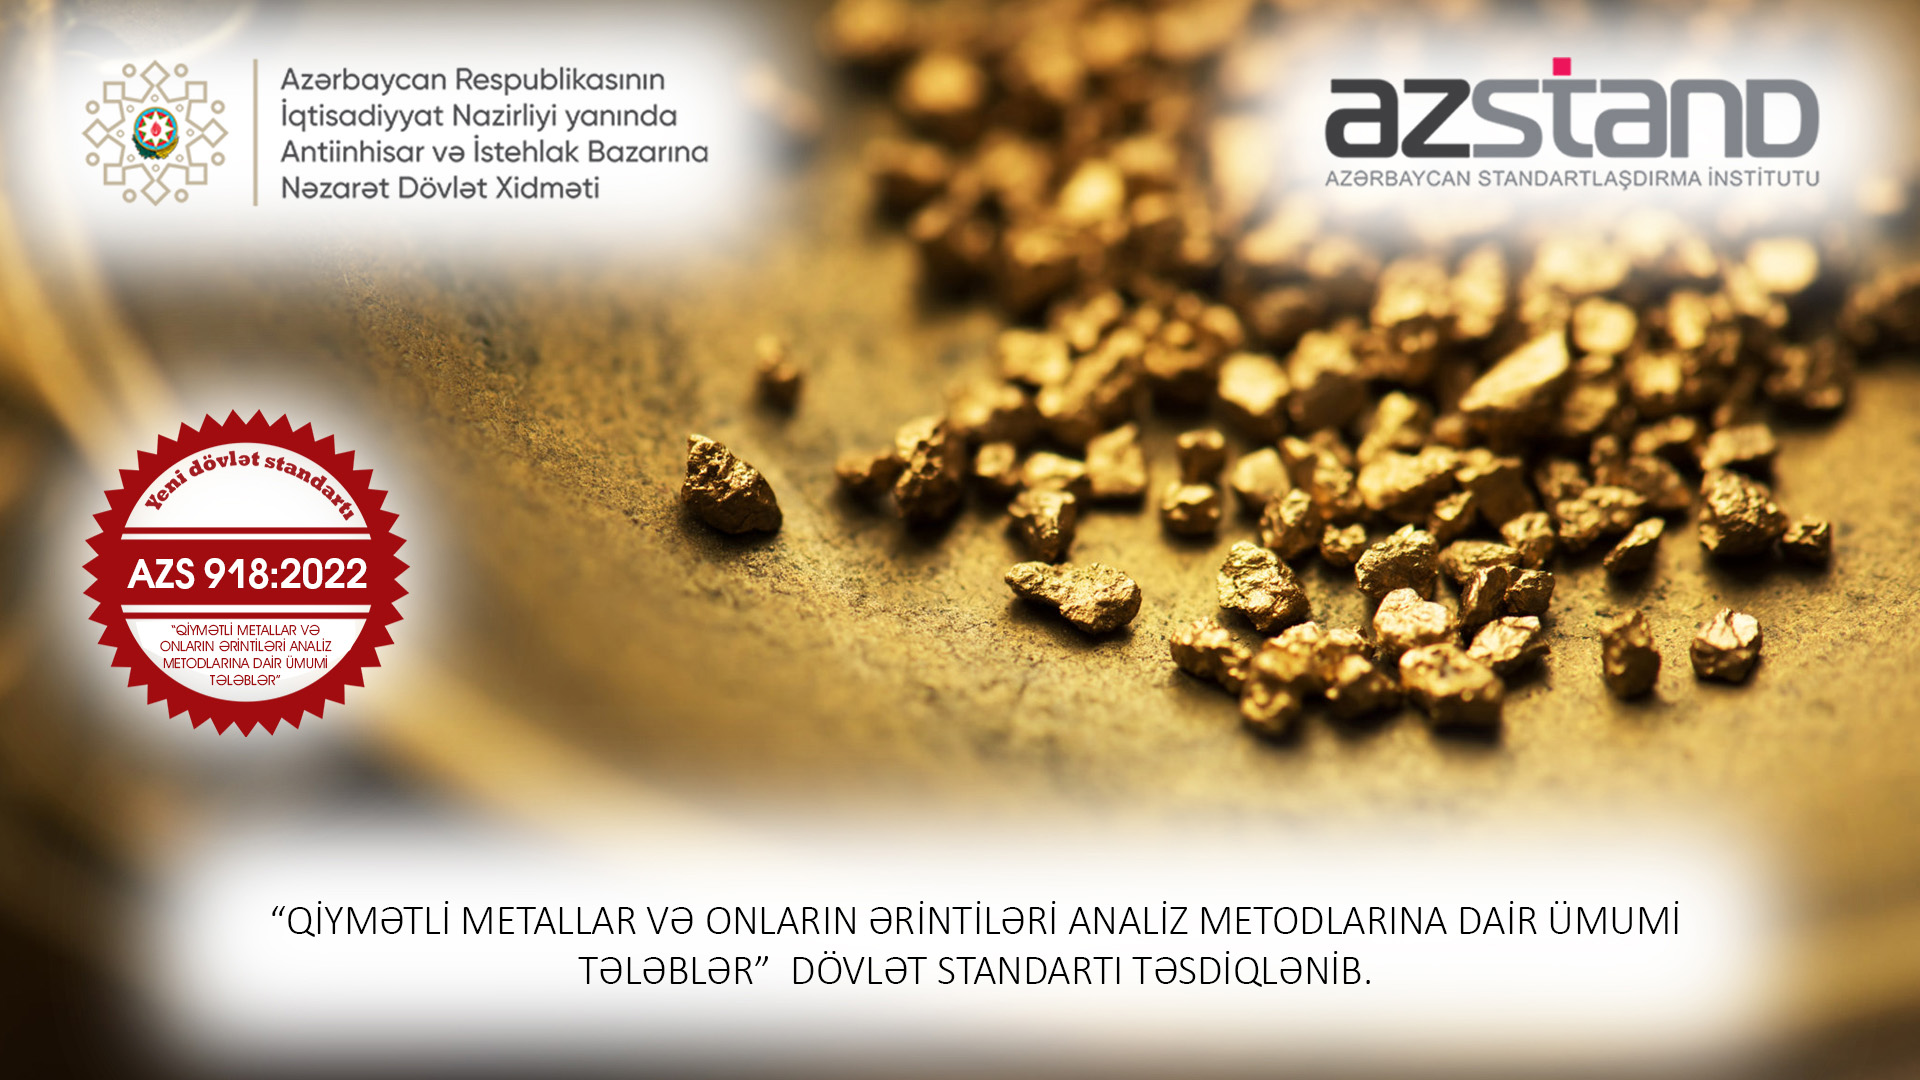 The state standard on methods of analysis of precious metals and their alloys was ...